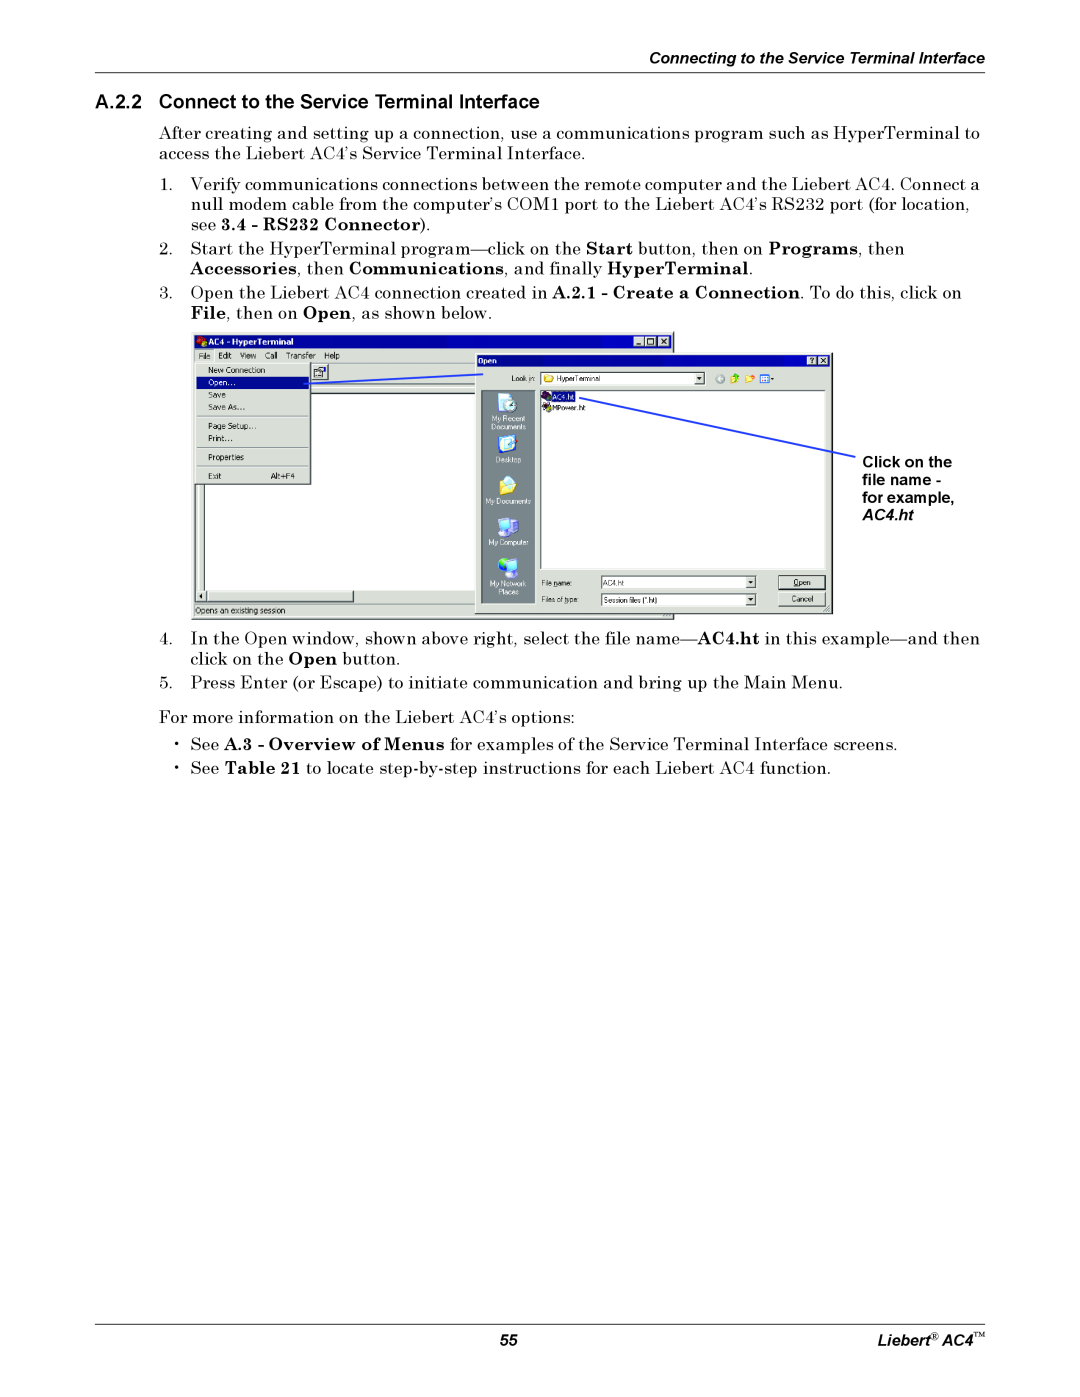 Emerson AC4 user manual A.2.2 Connect to the Service Terminal Interface 